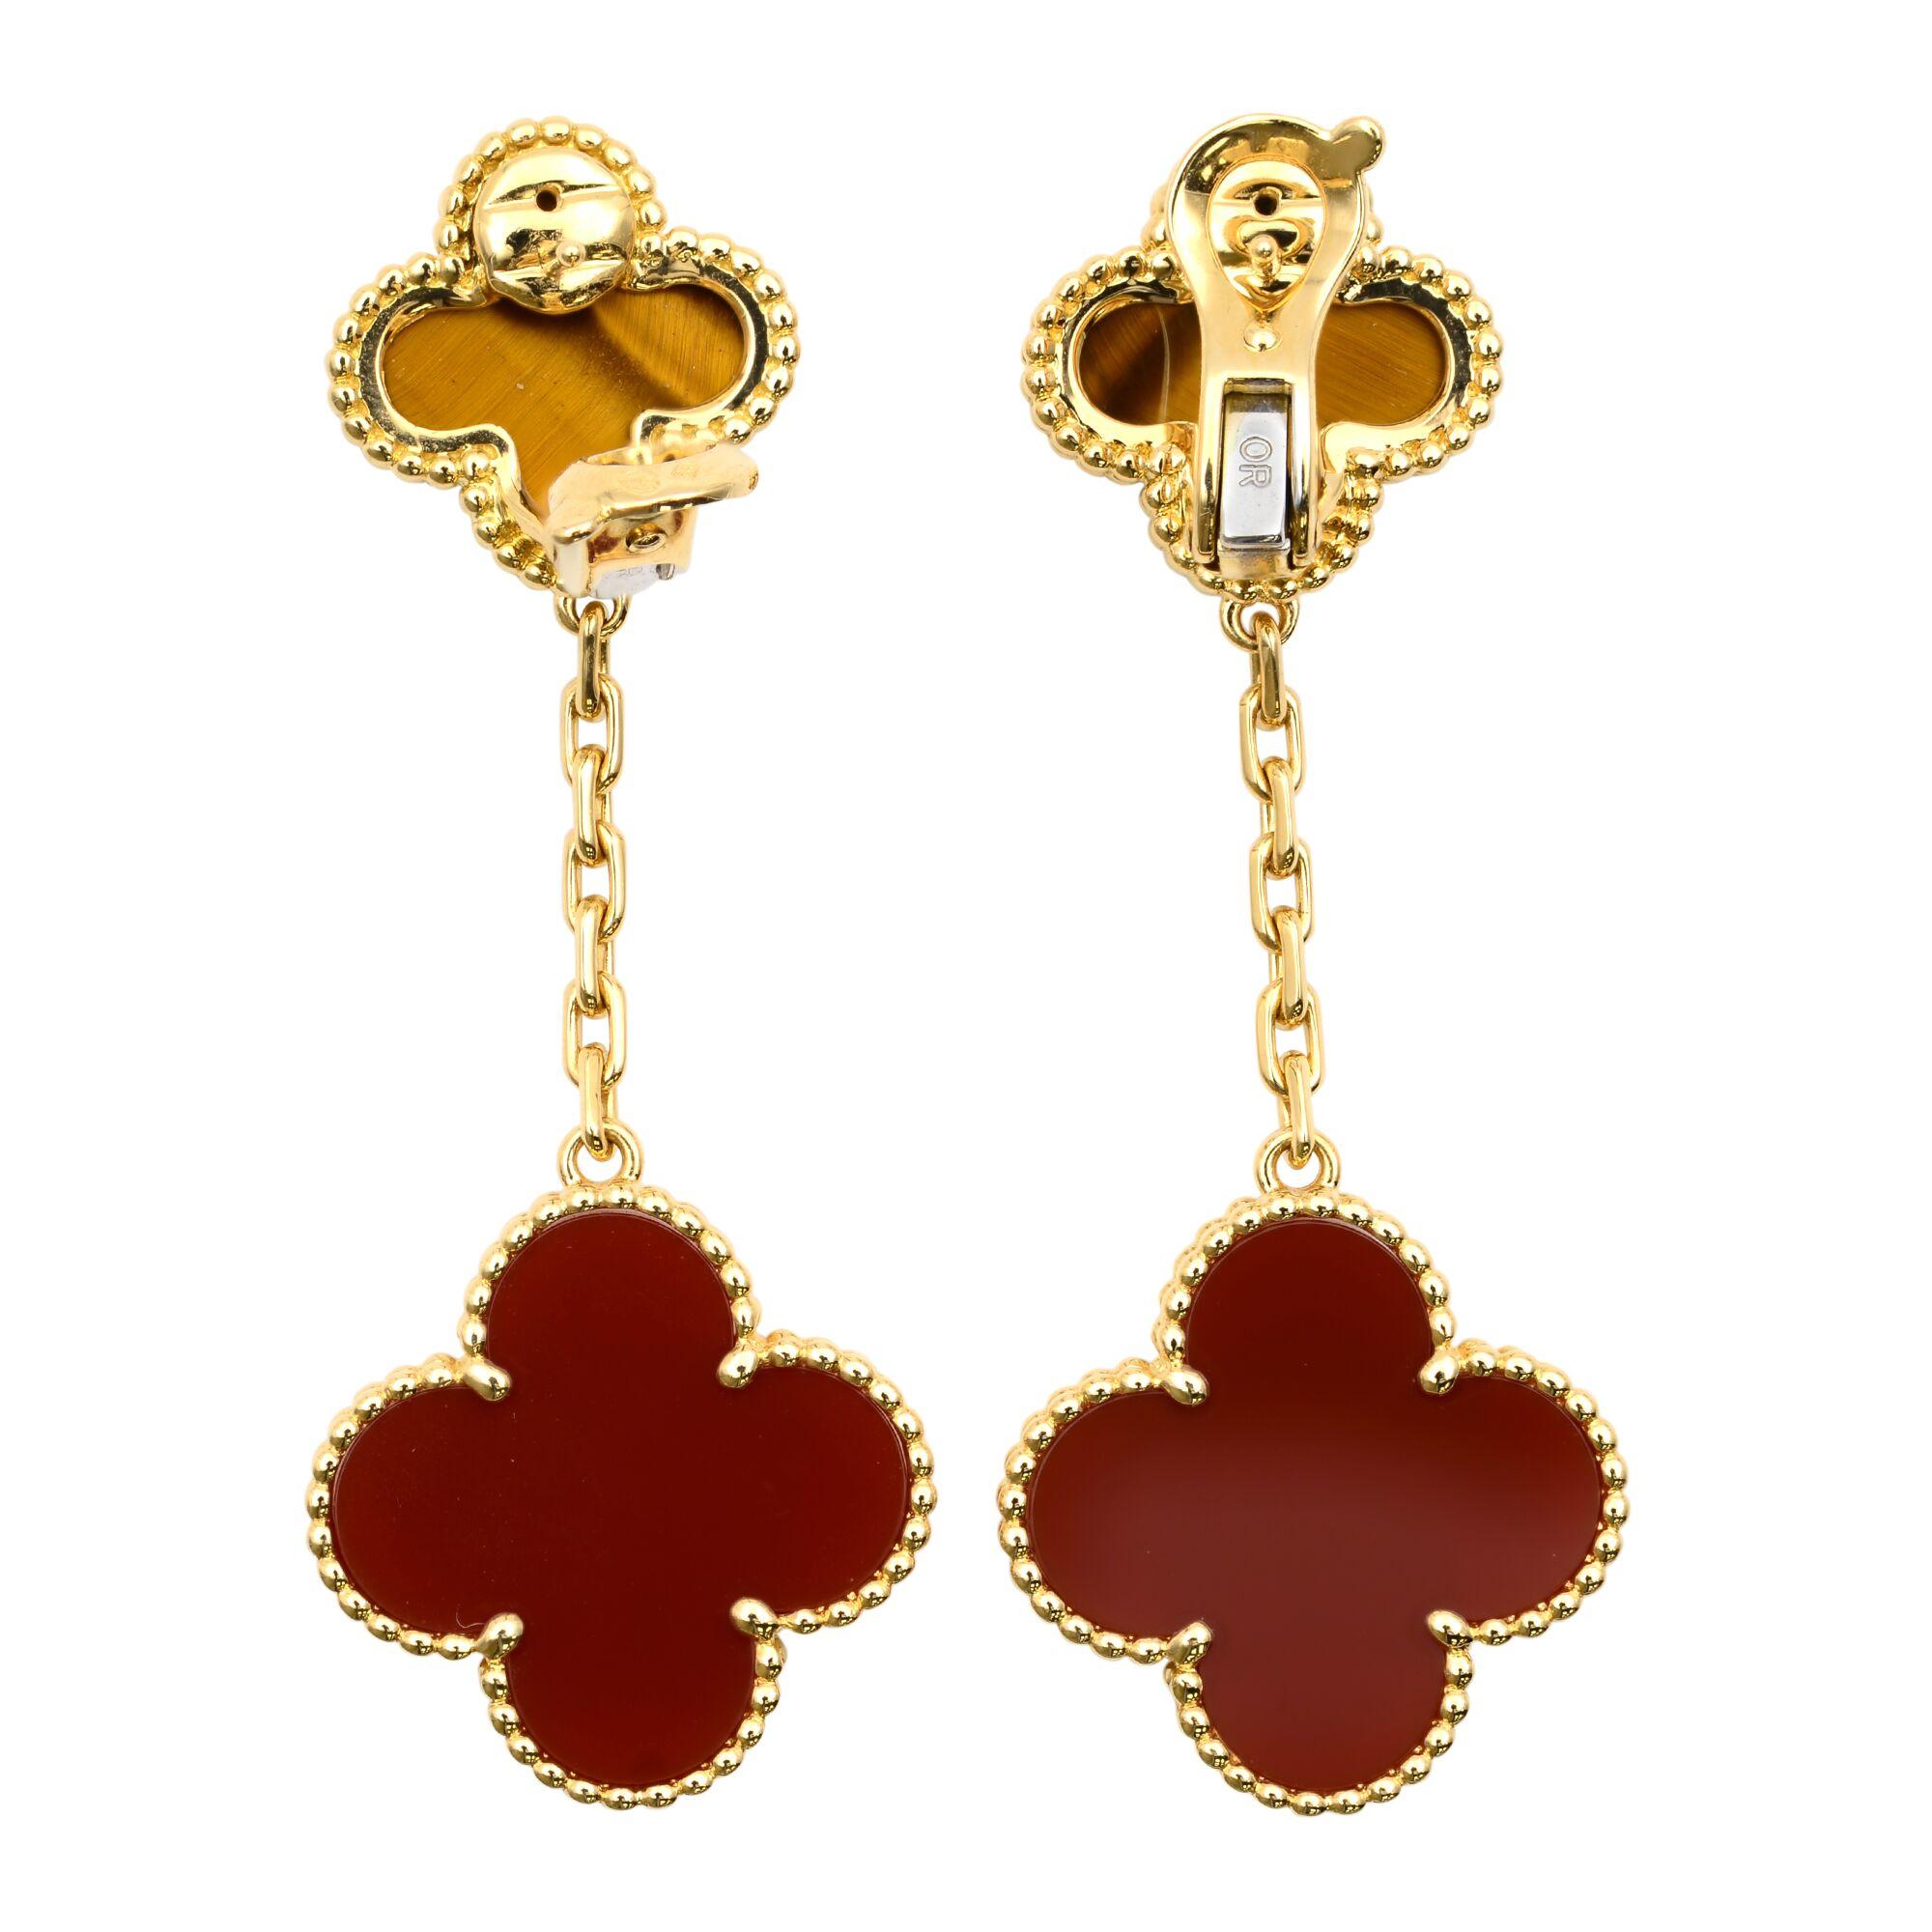 Van Cleef & Alhambra Magic Alhambra earrings, 2 motifs, 18K yellow gold, tiger’s eye, carnelian. Length: 2 inches.
Condition: pre-owned like new, comes with box and papers.